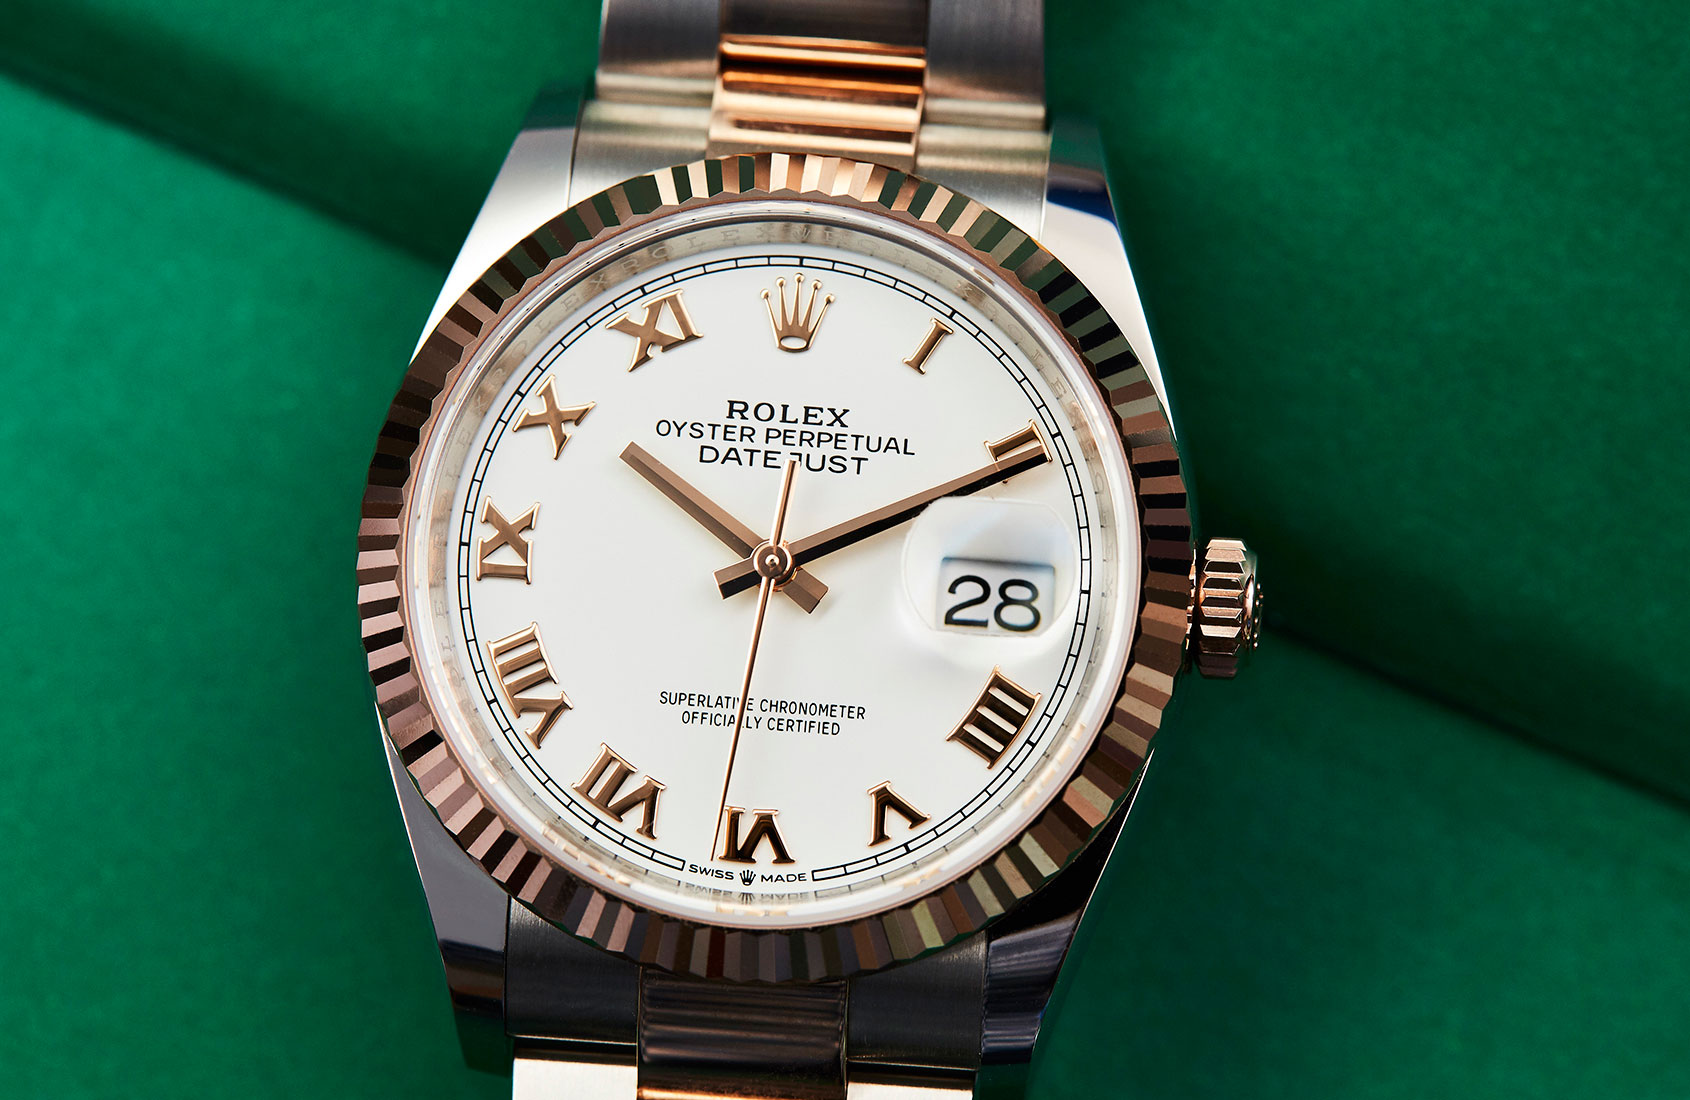 The Rolex Datejust - one of the true 